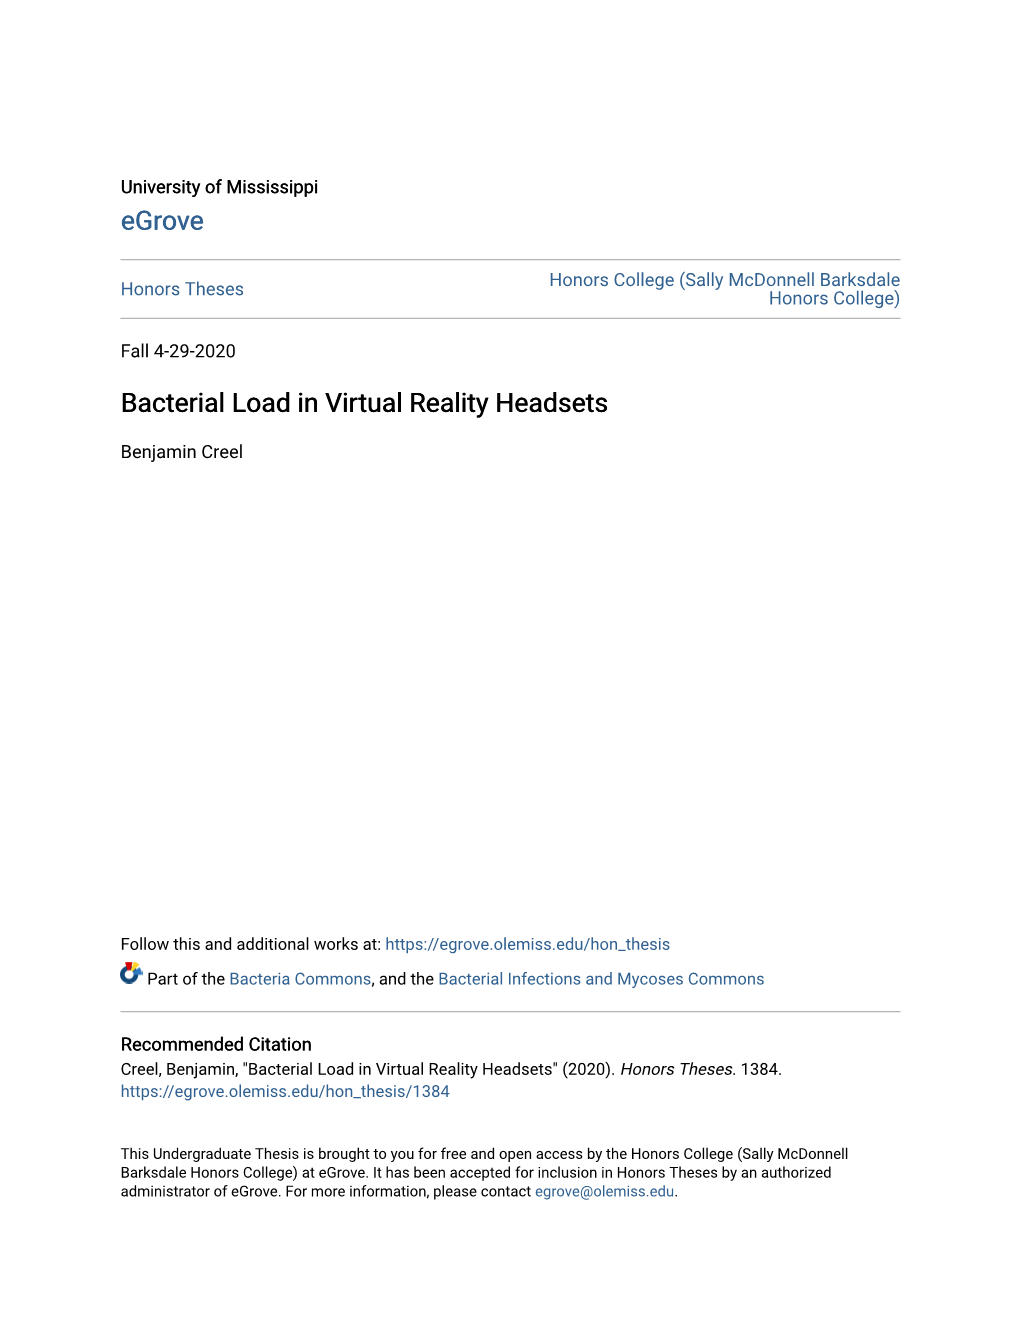 Bacterial Load in Virtual Reality Headsets